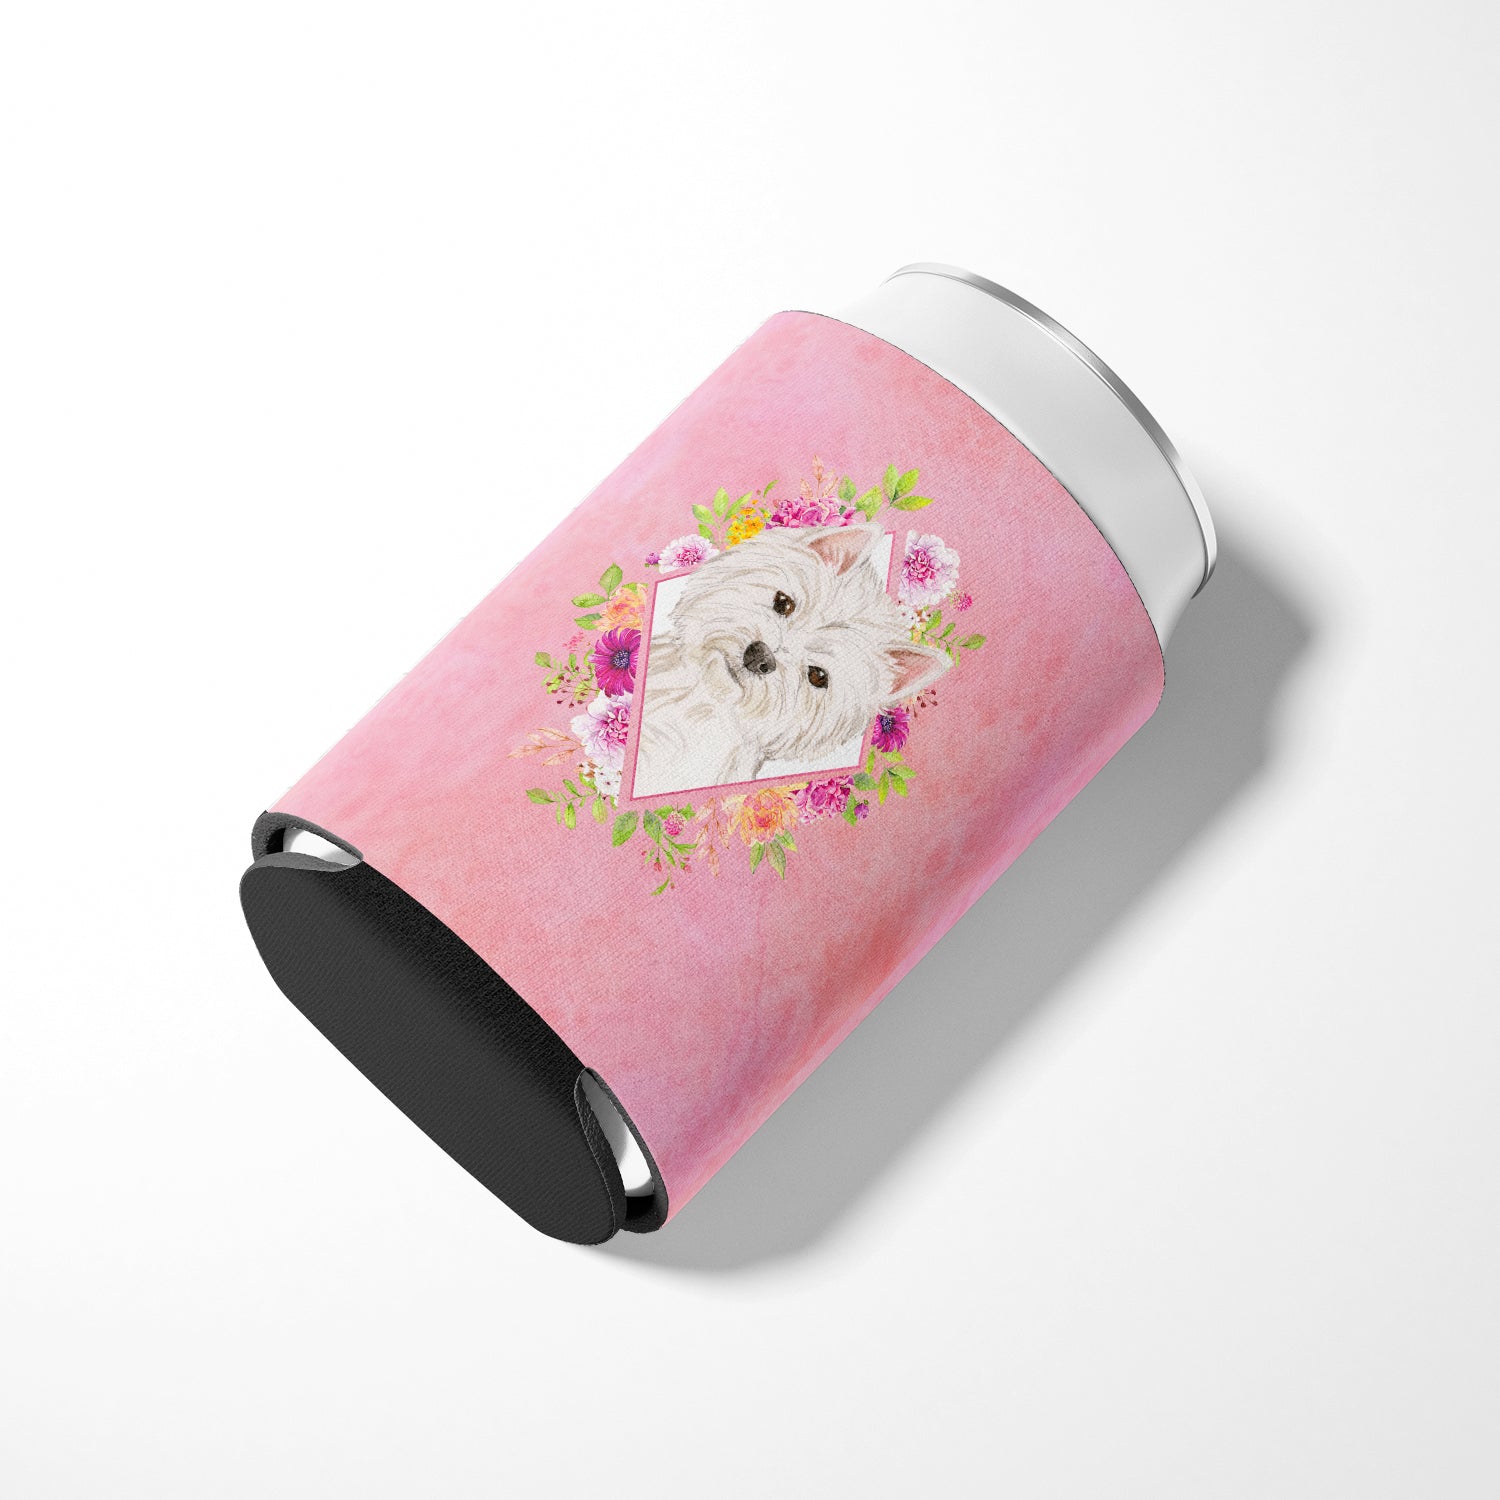 Westie  Pink Flowers Can or Bottle Hugger CK4203CC  the-store.com.